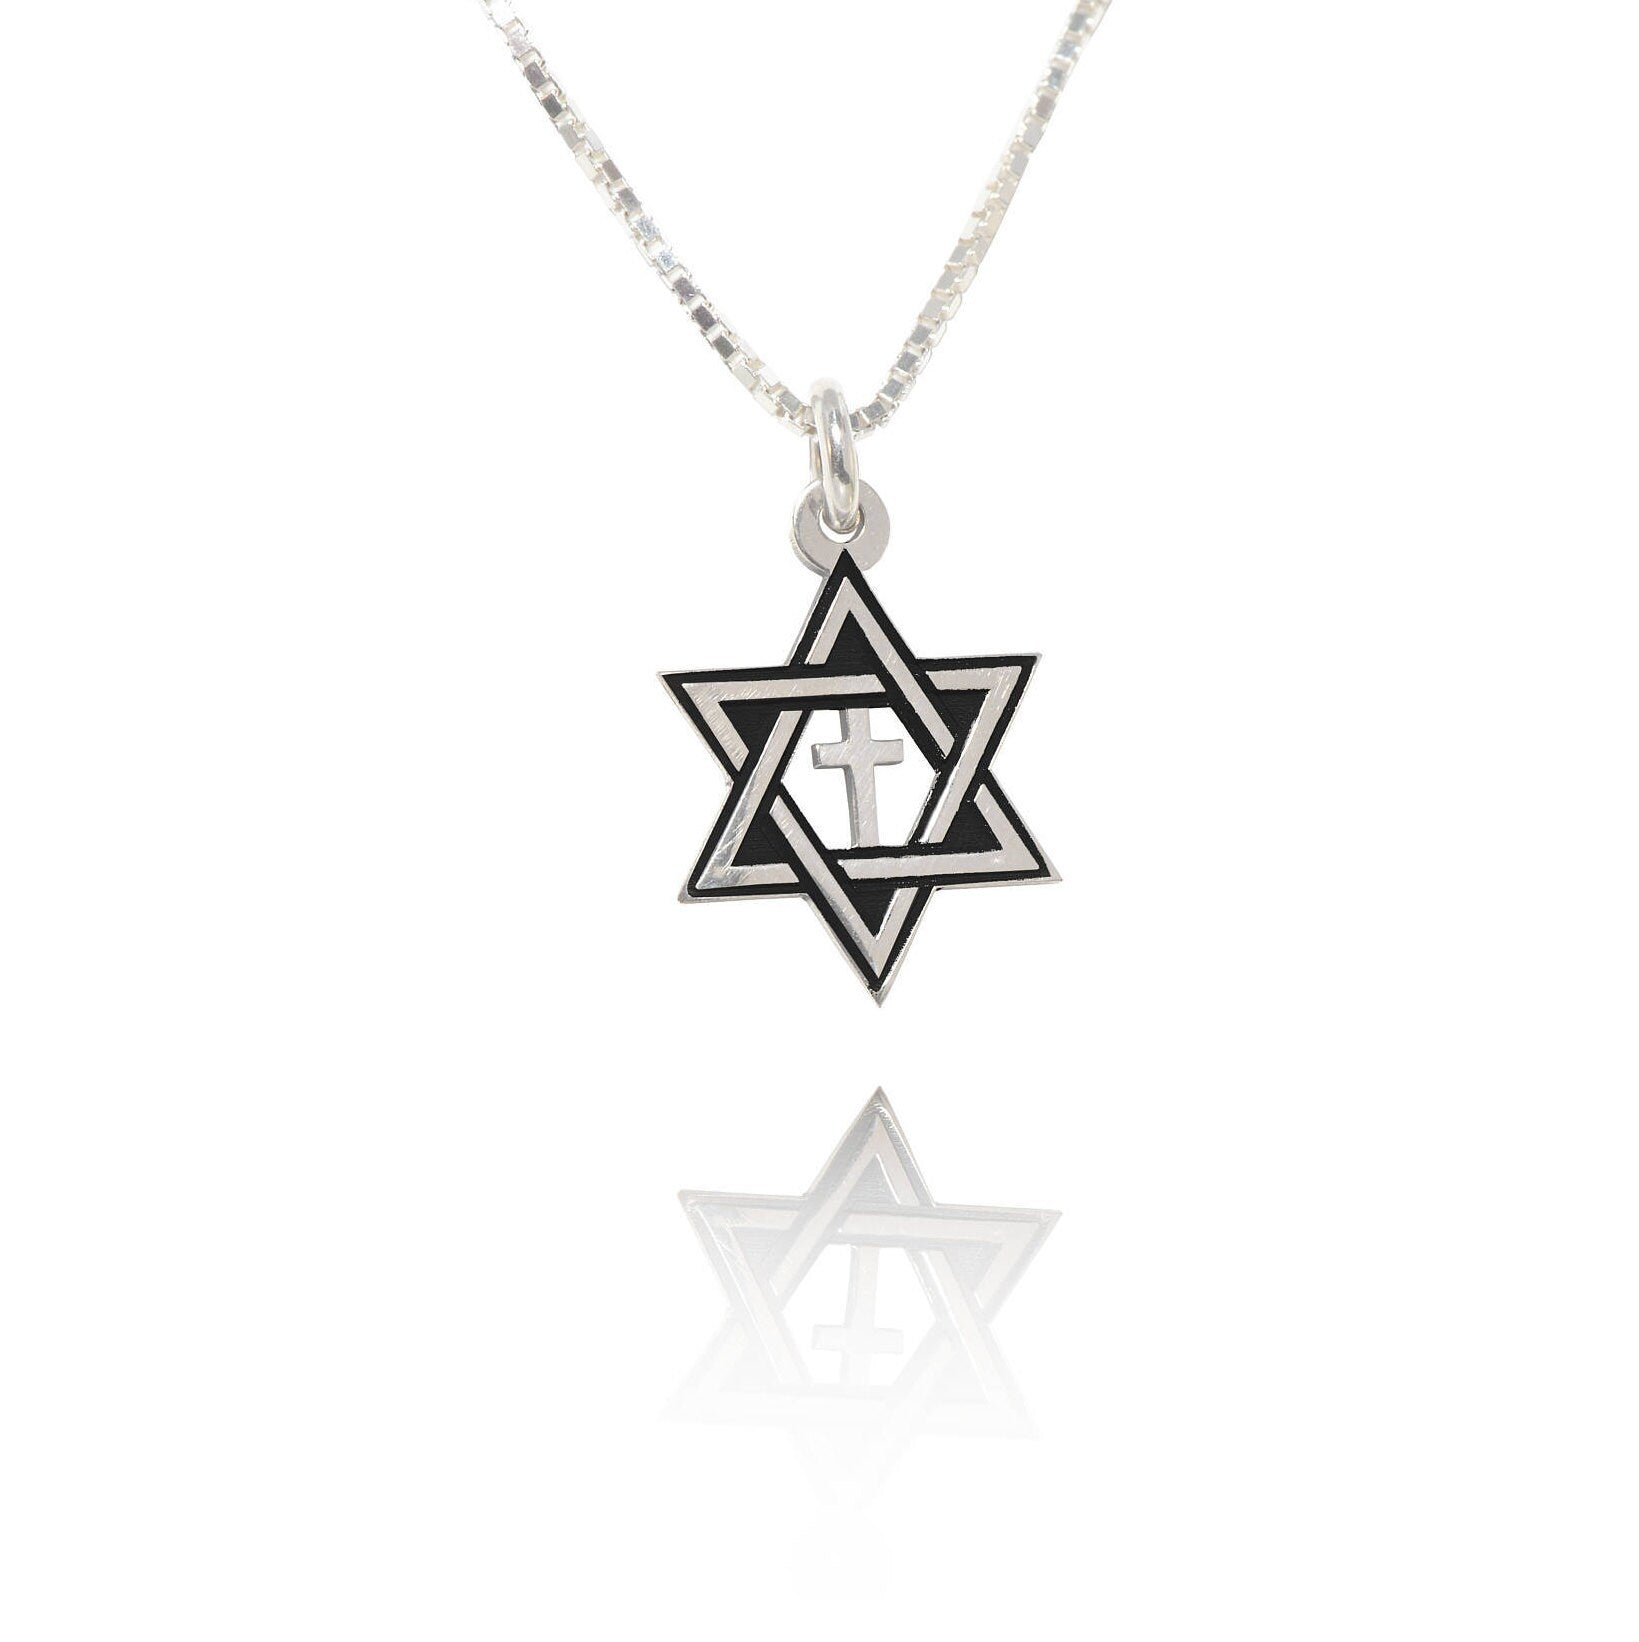 Star of David with Cross Necklace - Sterling Silver Hebrew Jewish & Christian Pendant Necklace - Jerusalem Cross Pendant - Gift for Men